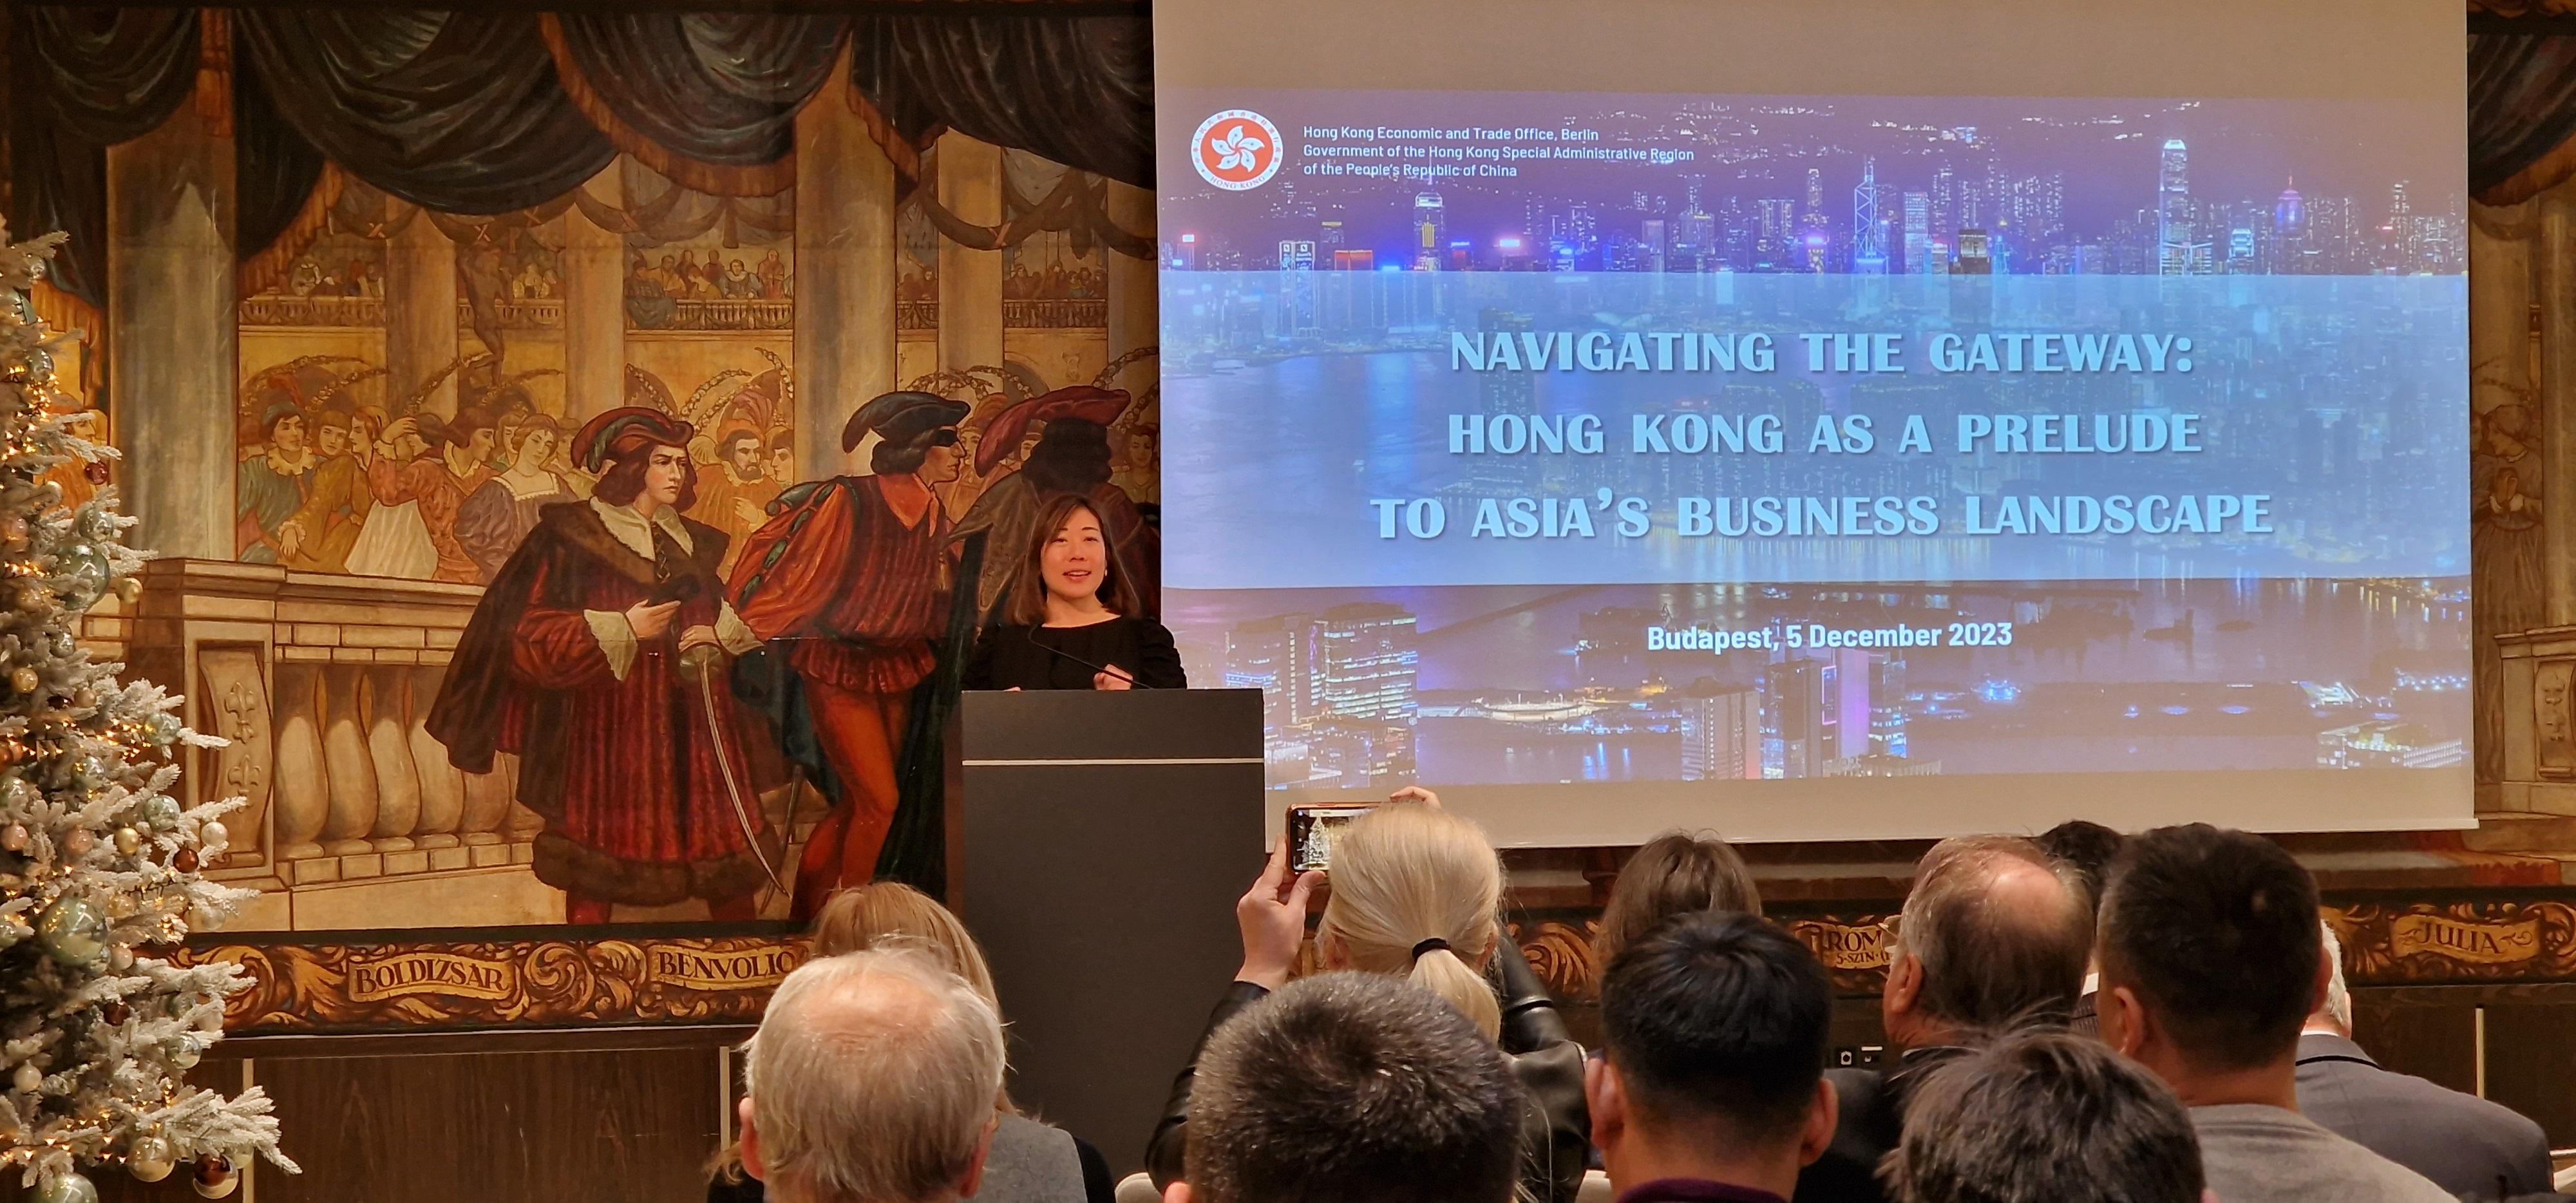 The Hong Kong Economic and Trade Office, Berlin (HKETO Berlin), hosted a business luncheon on December 5 (Budapest time) in Budapest that gathered corporate leaders and government officials from Hungary to learn about Hong Kong's latest economic developments and government initiatives. Photo shows the Director of HKETO Berlin, Ms Jenny Szeto, speaking at the luncheon.